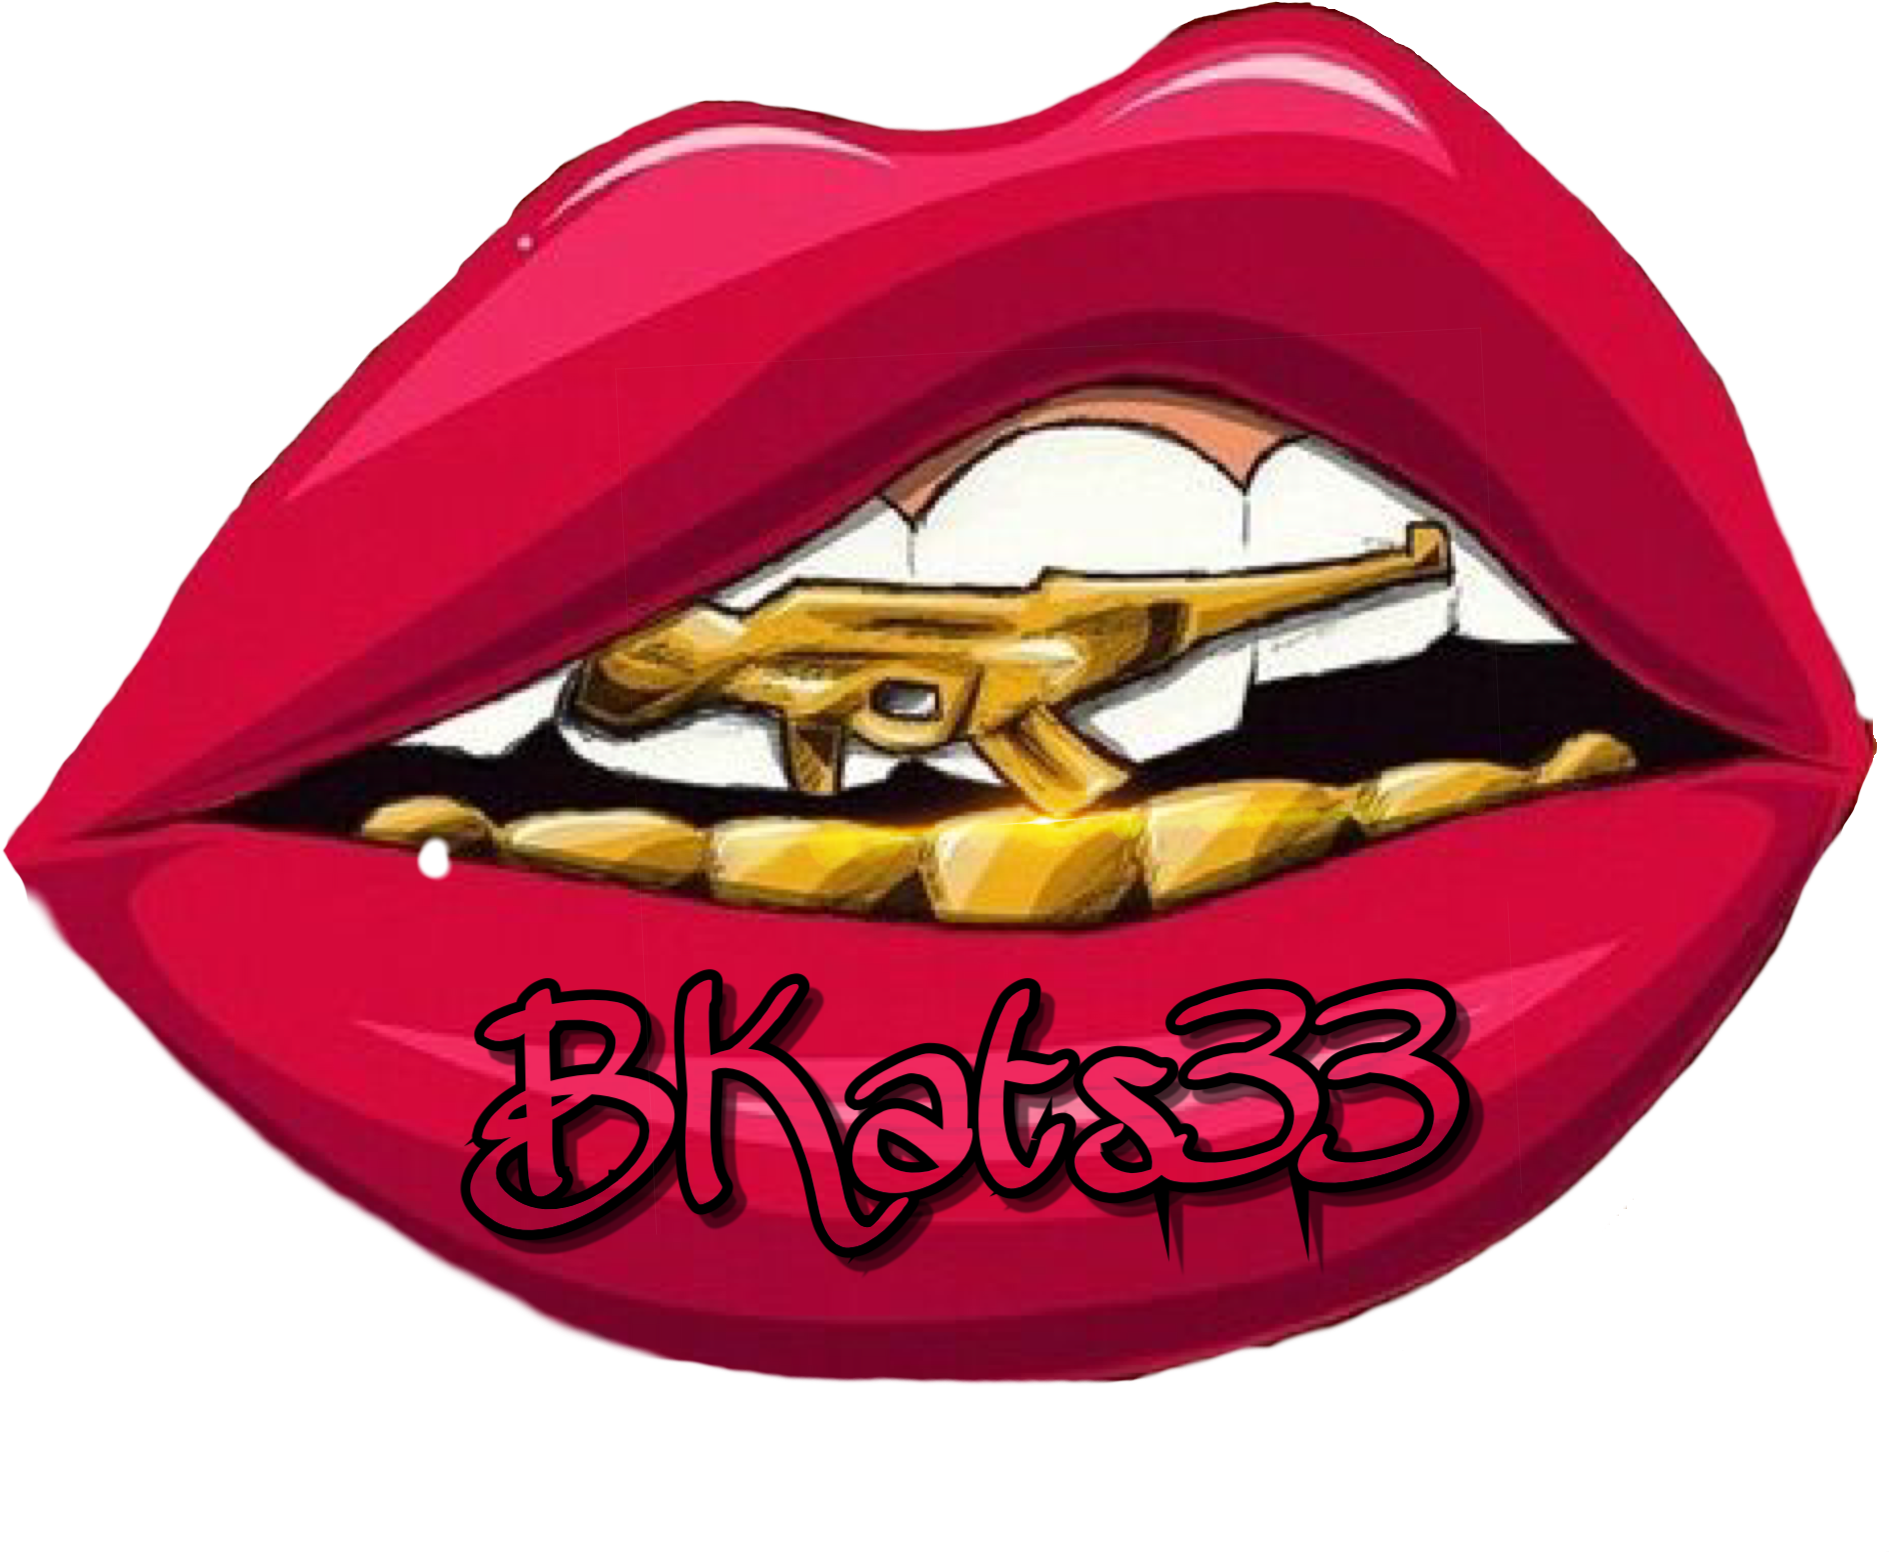 Art Badbitches Badgirl Lips Sexy Lipstick Red Hot Grill - Cartoon Lips With Grill (2048x1684)